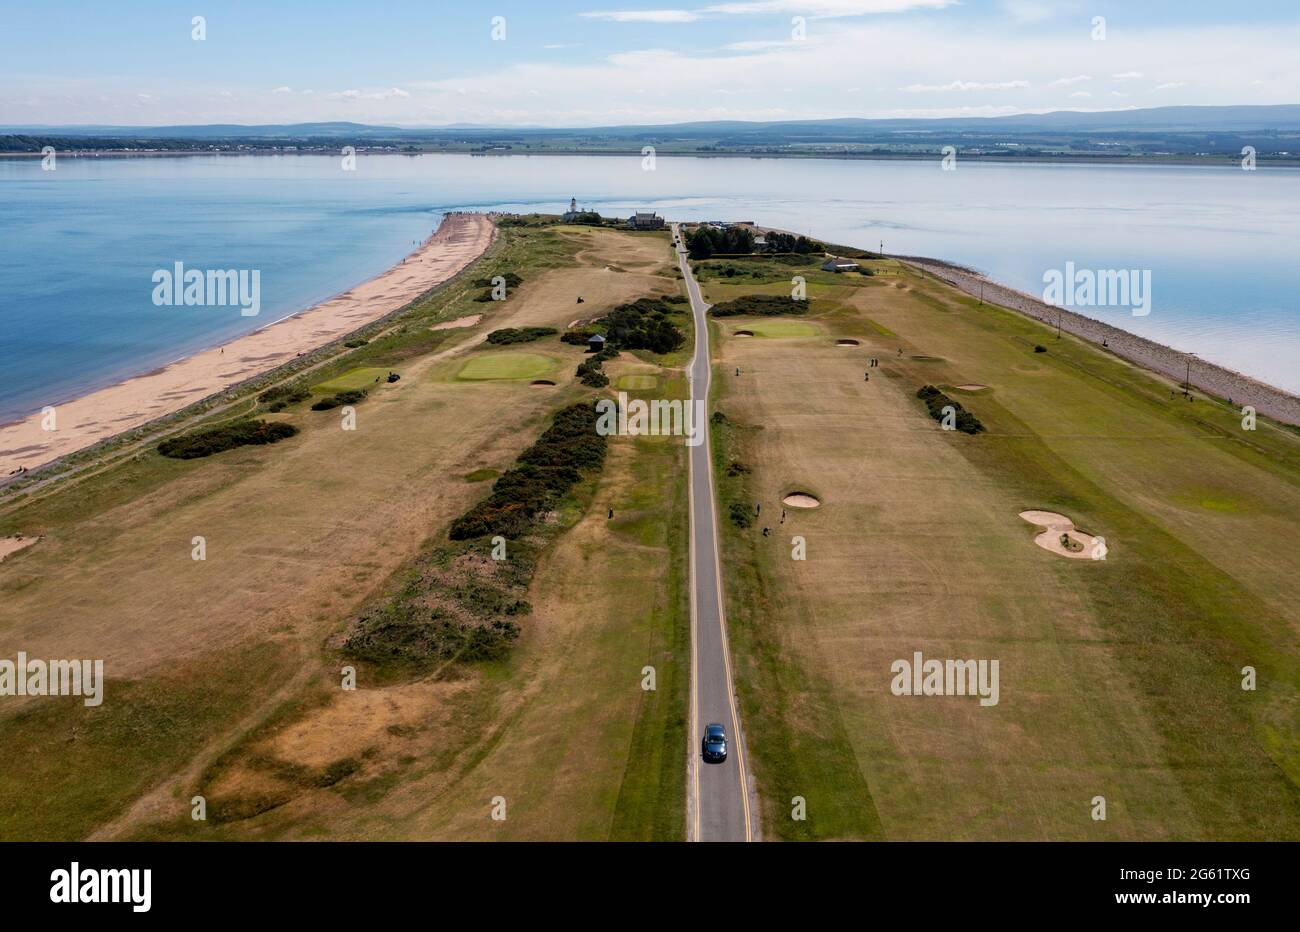 Aerial view of Chanonry Point peninsula on the shores of the Moray Firth near the villages of Fortrose & Rosemarkie, on the Black Isle, Scotland, UK. Stock Photo